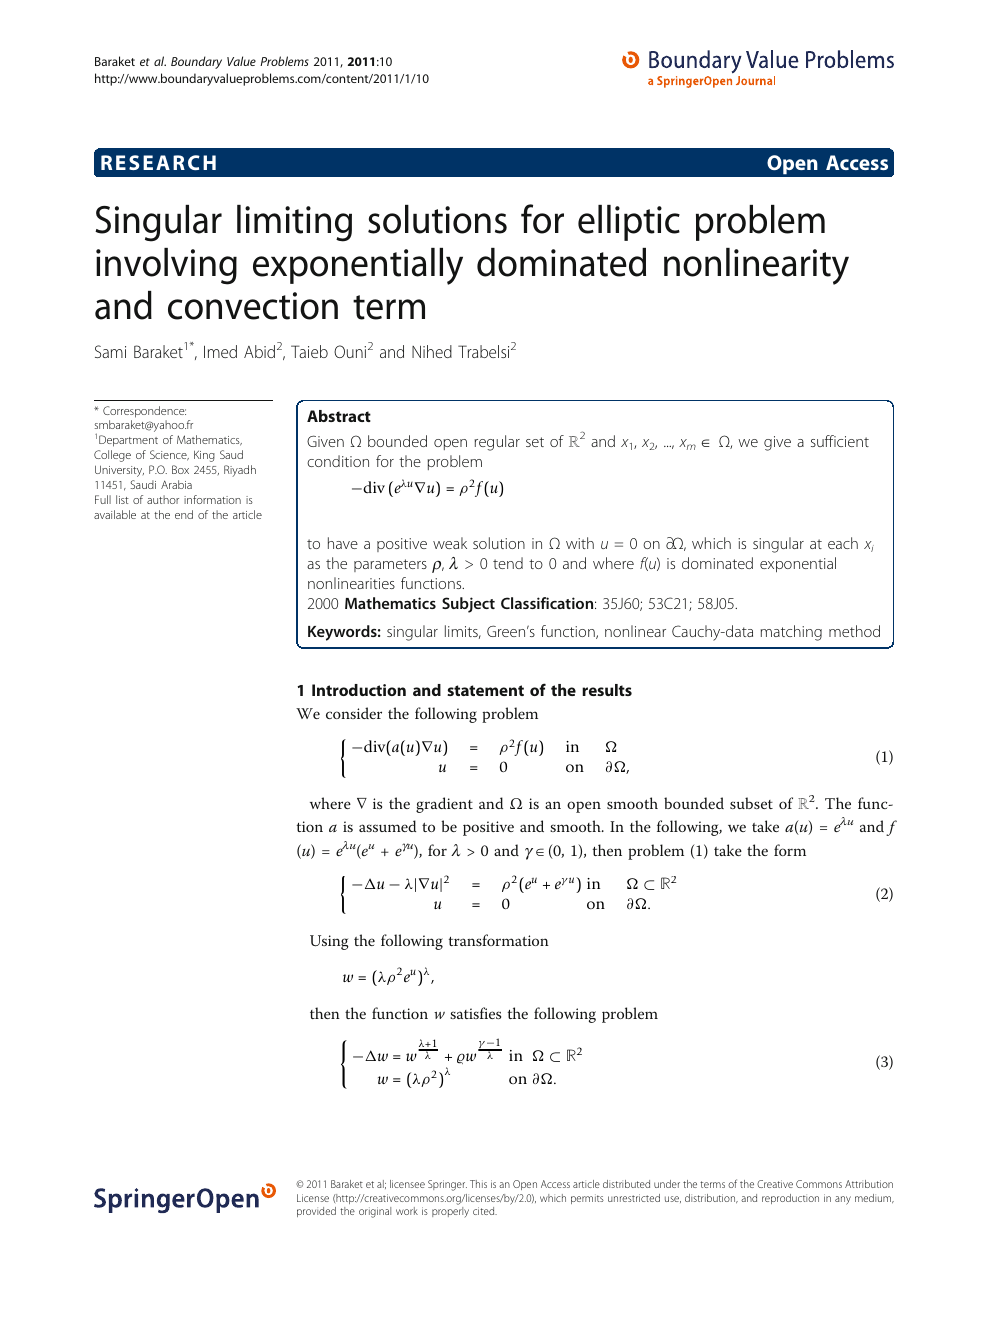 Singular Limiting Solutions For Elliptic Problem Involving Exponentially Dominated Nonlinearity And Convection Term Topic Of Research Paper In Mathematics Download Scholarly Article Pdf And Read For Free On Cyberleninka Open Science